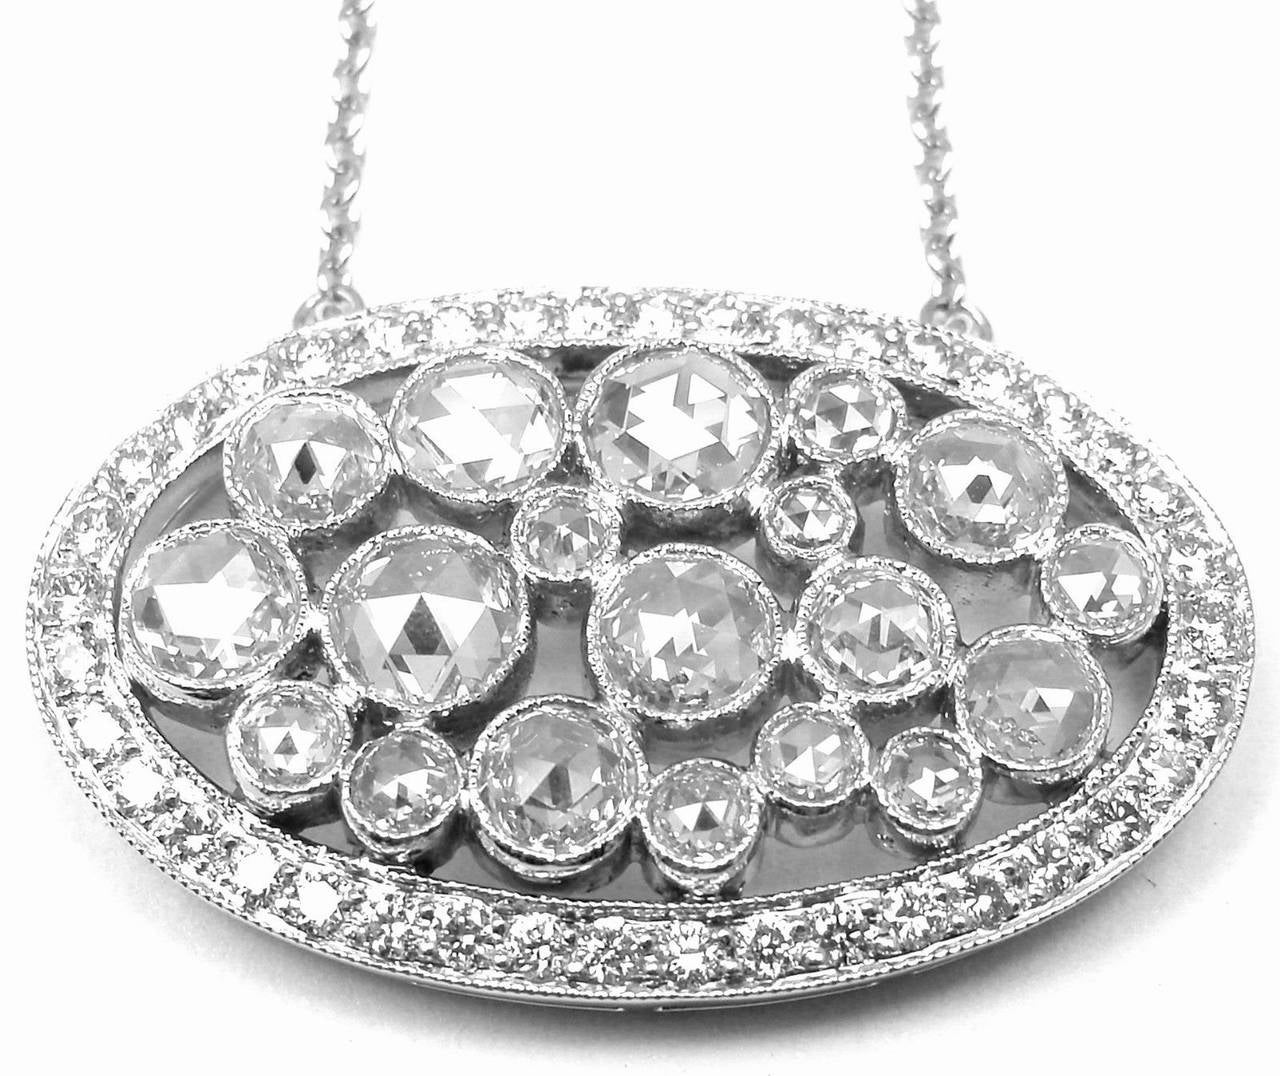 Platinum Diamond Cobblestone Pendant Necklace by Tiffany & Co.
With Rose-cut diamonds, carat total weight 1.03; round brilliant diamonds, carat total weight .27.

Details:
Weight: 7.7 grams
Length: 16